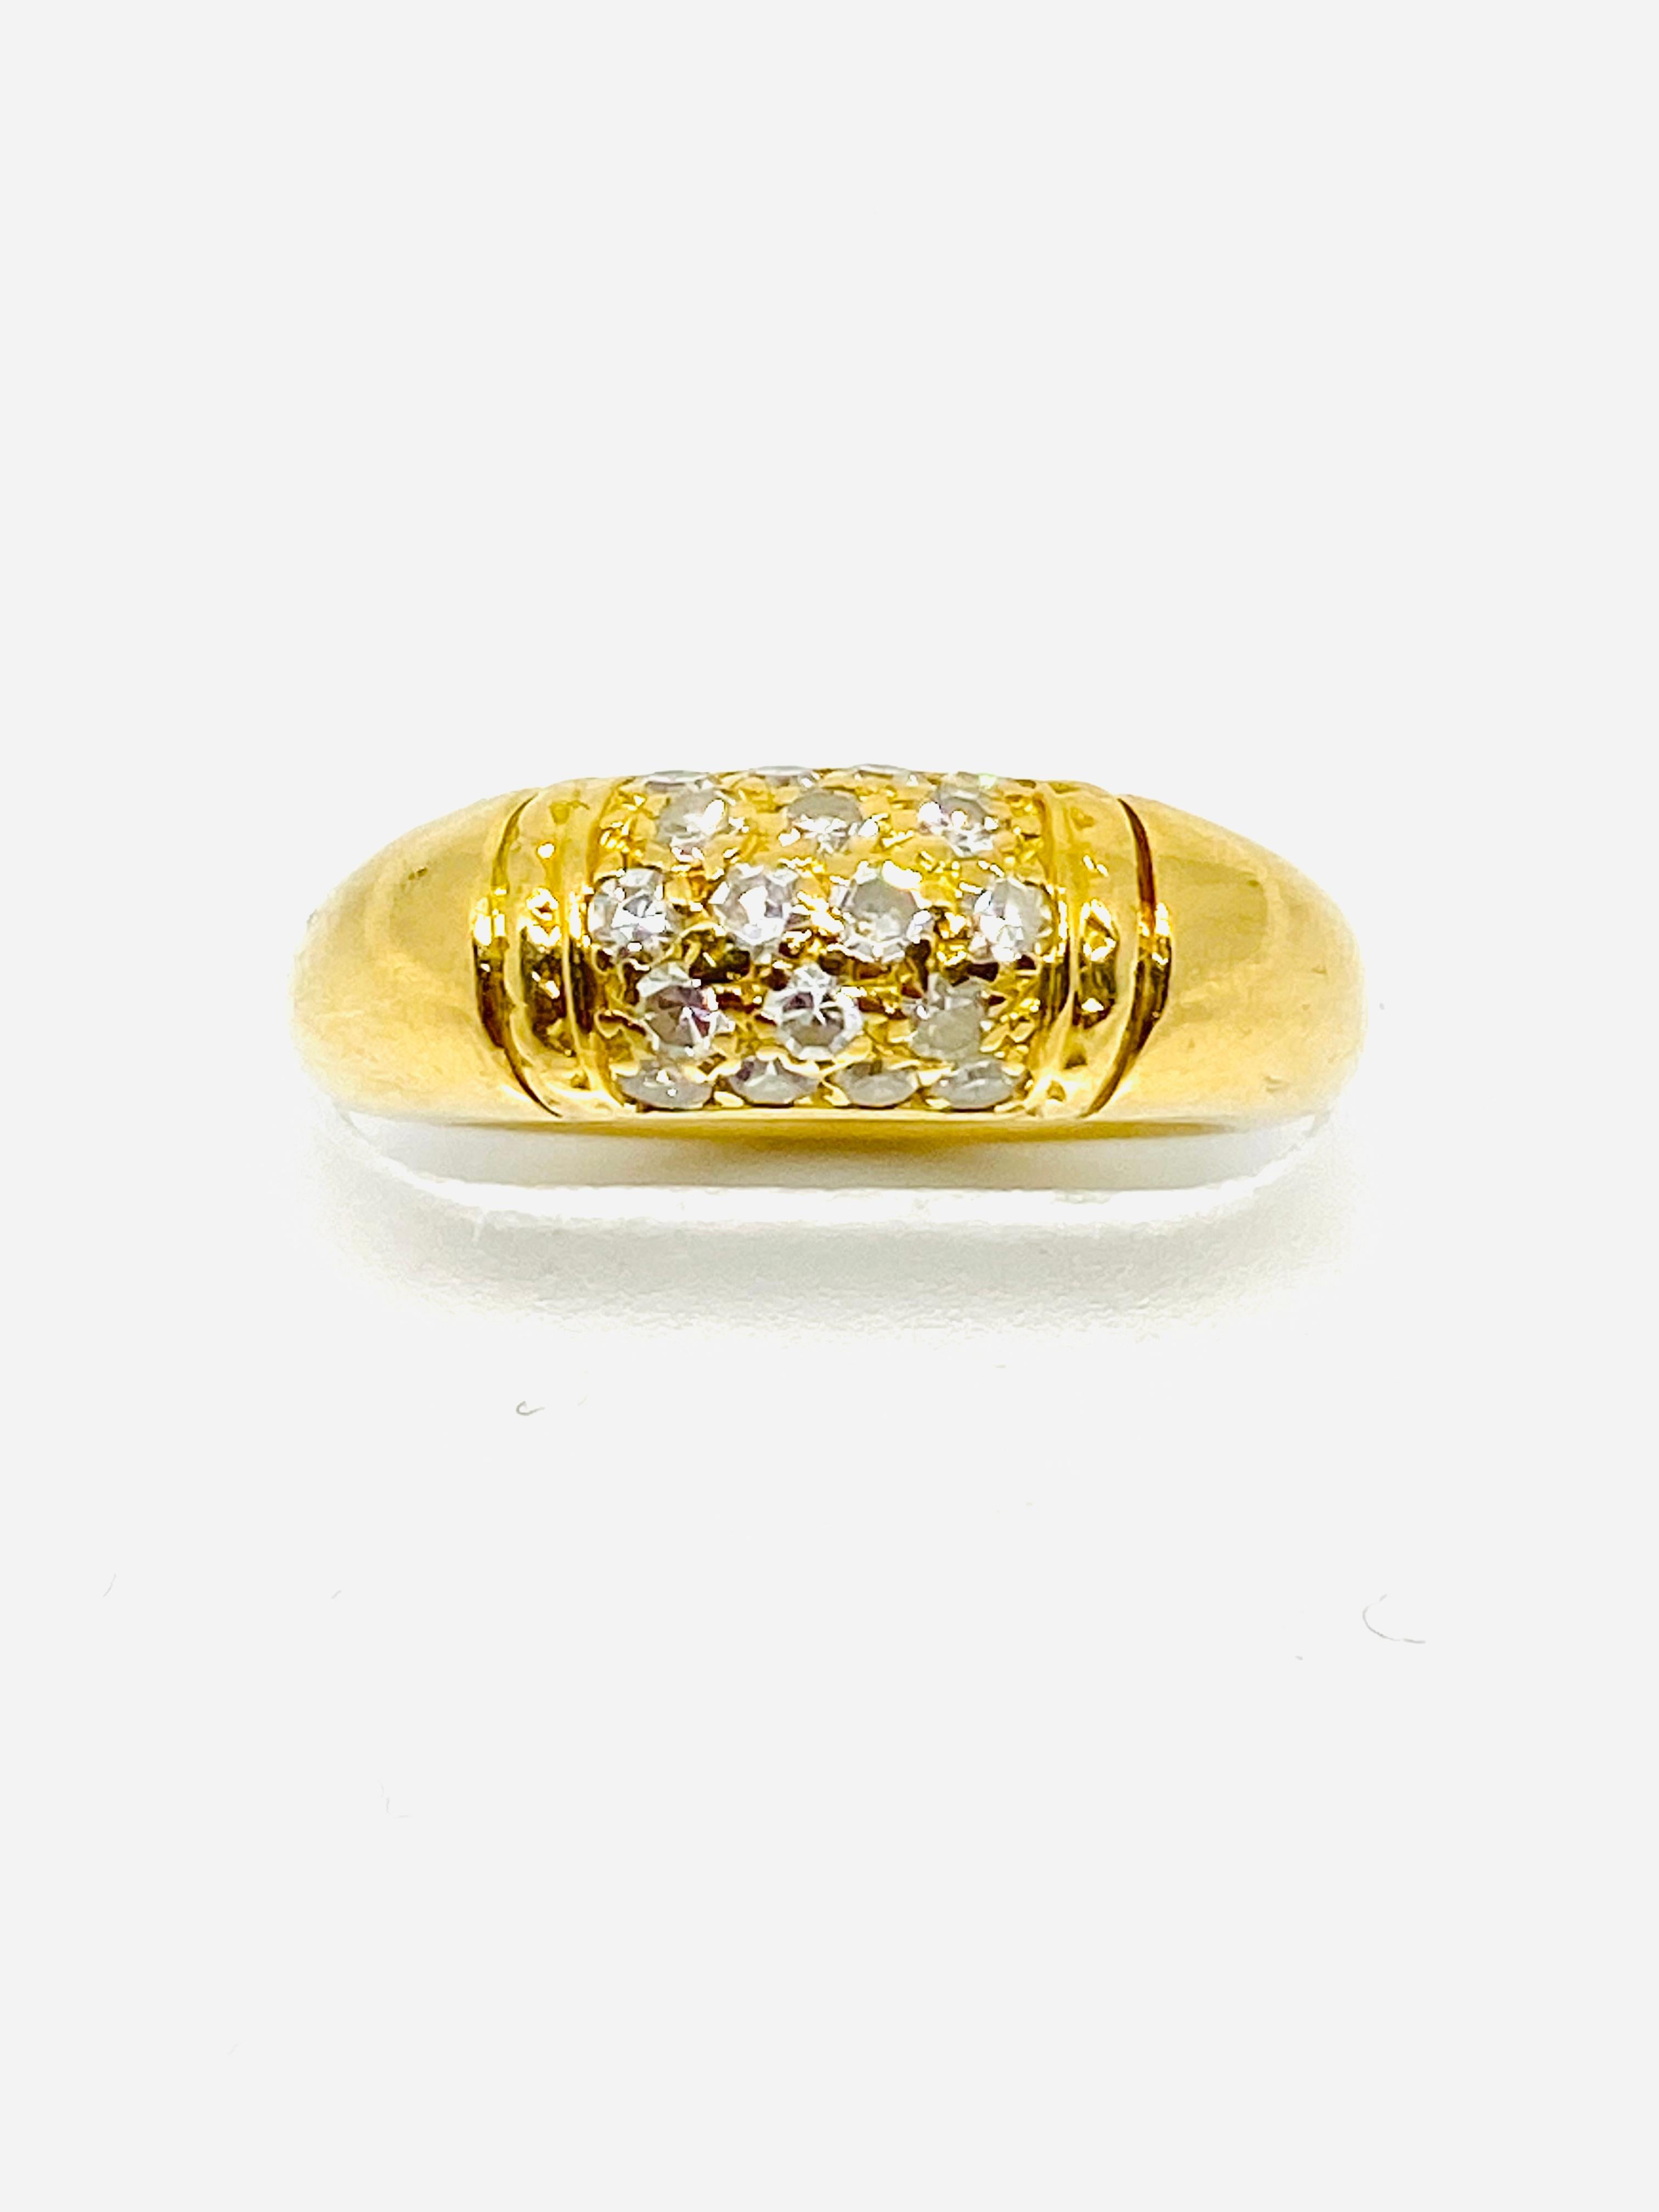 Product details:
Material: 18K Yellow Gold
Gemstone: 18 round brilliant cut diamonds 38cts F-G/ VVS2-VS1
Measurements: 0.5” long and 0.25” high, 0.25” wide 
Ring Size: 5- 5.25
Weight: 8.9 g.
Hallmarks: VCA, 750, 68, 115530